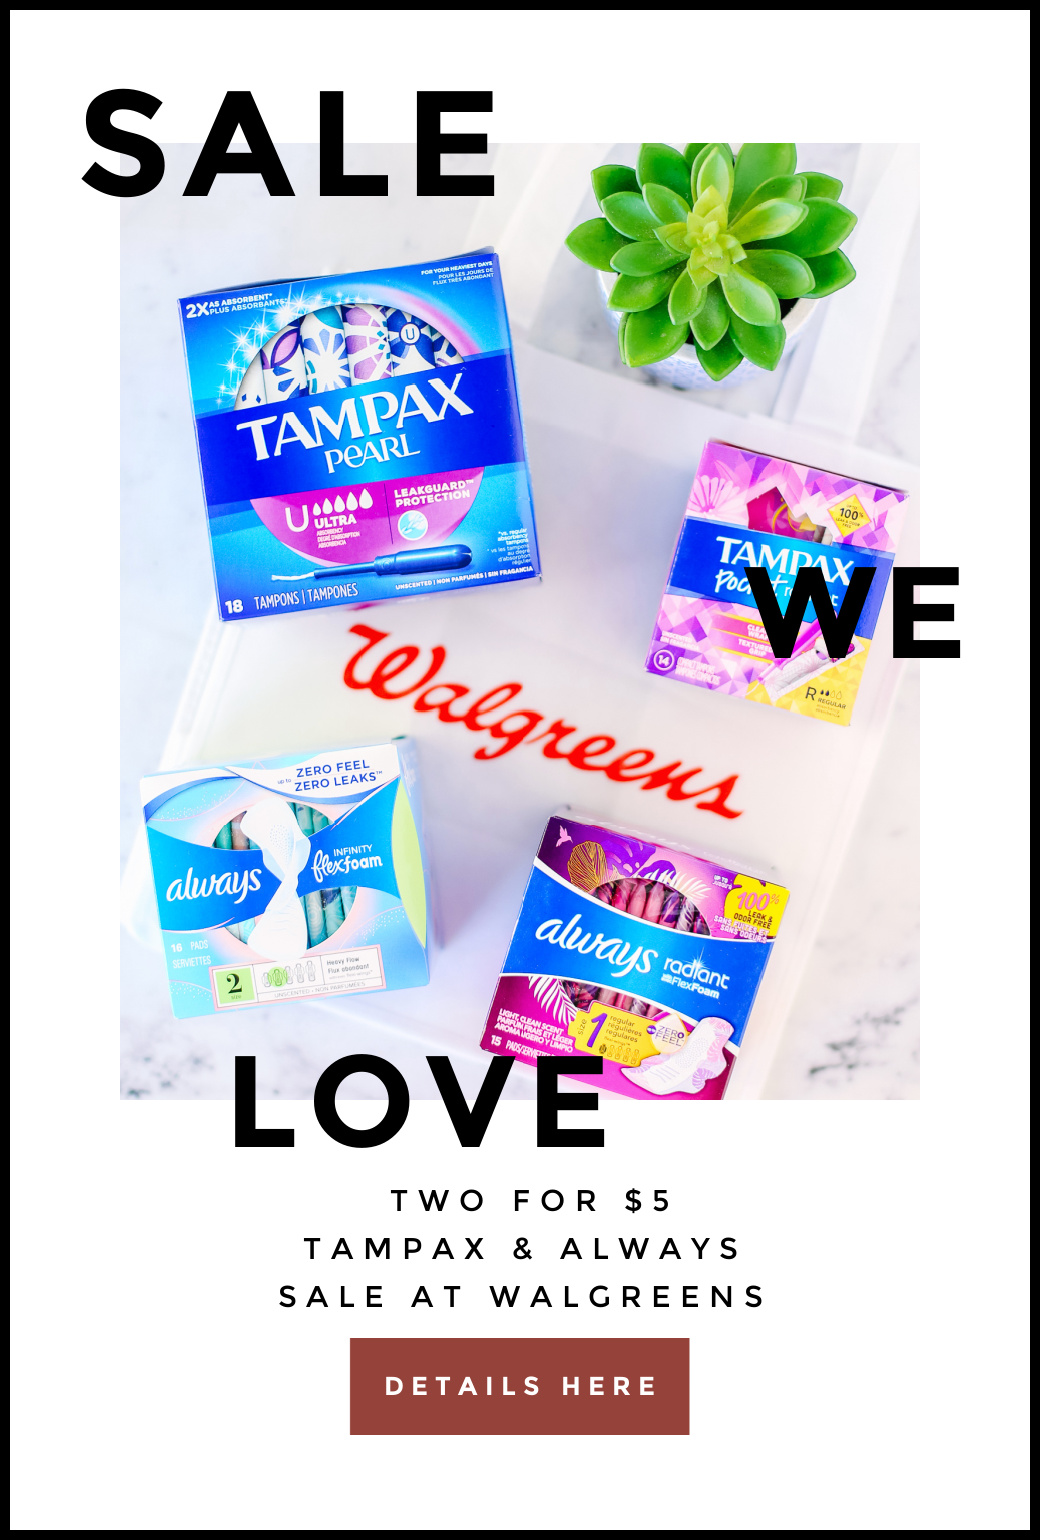 Now is a great time to stock up on Tampax & Always at @Walgreens! Through 4/24, you can score select products 2/$5! I’m sharing all of the details on the blog.